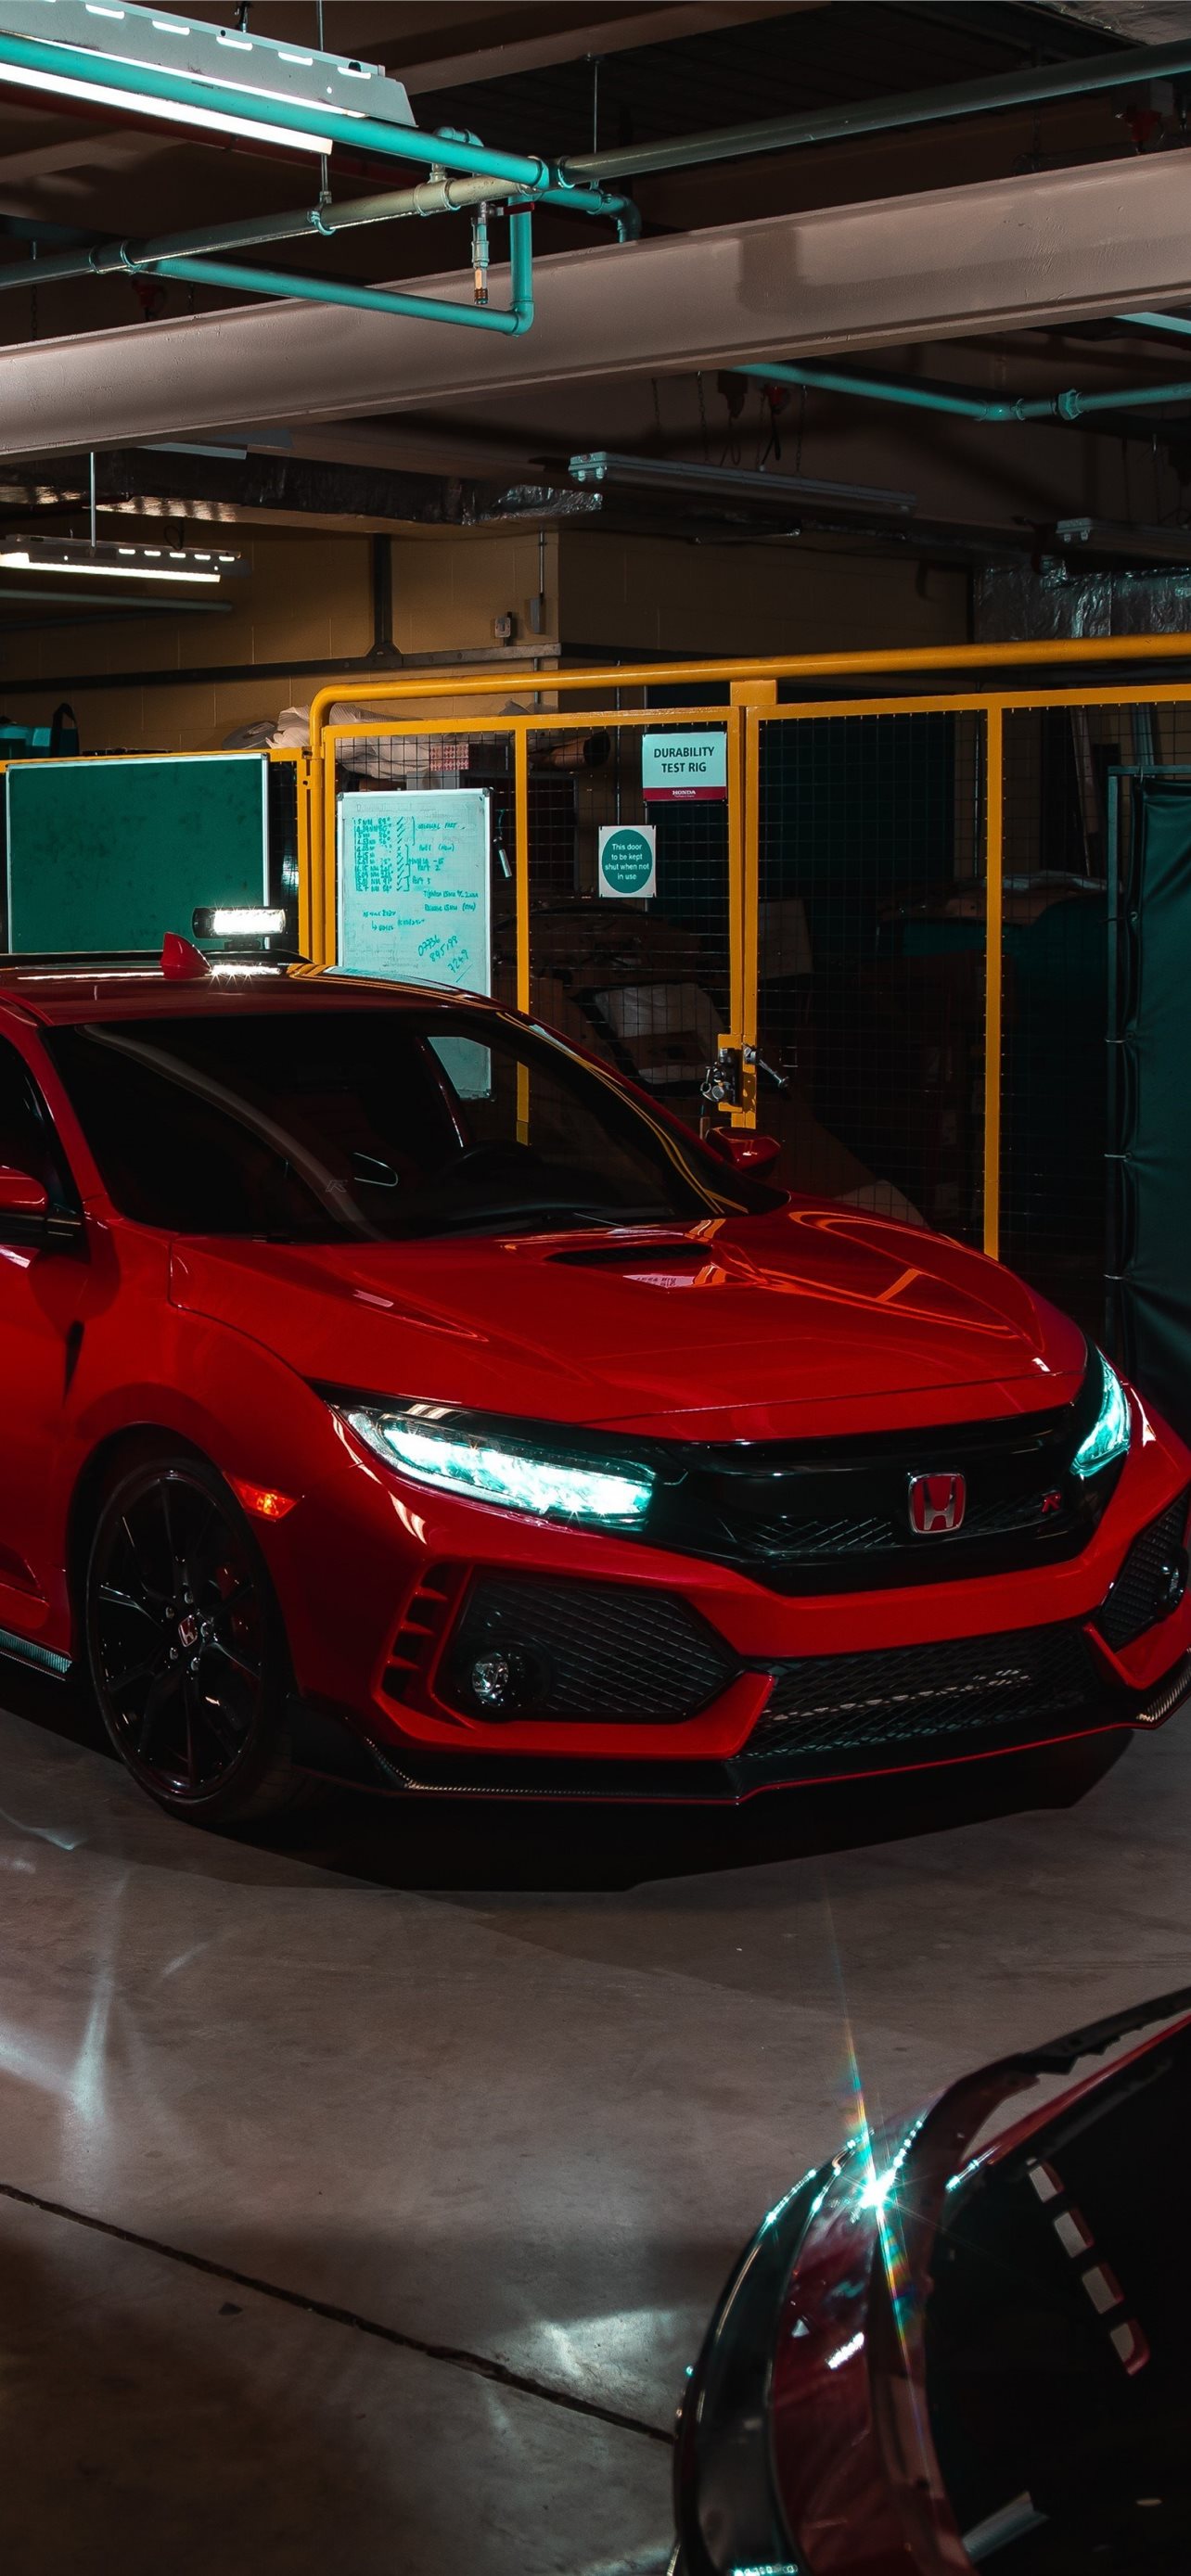 Honda Civic Type R Pickup Truck Concept 18 Cars Iphone Wallpapers Free Download